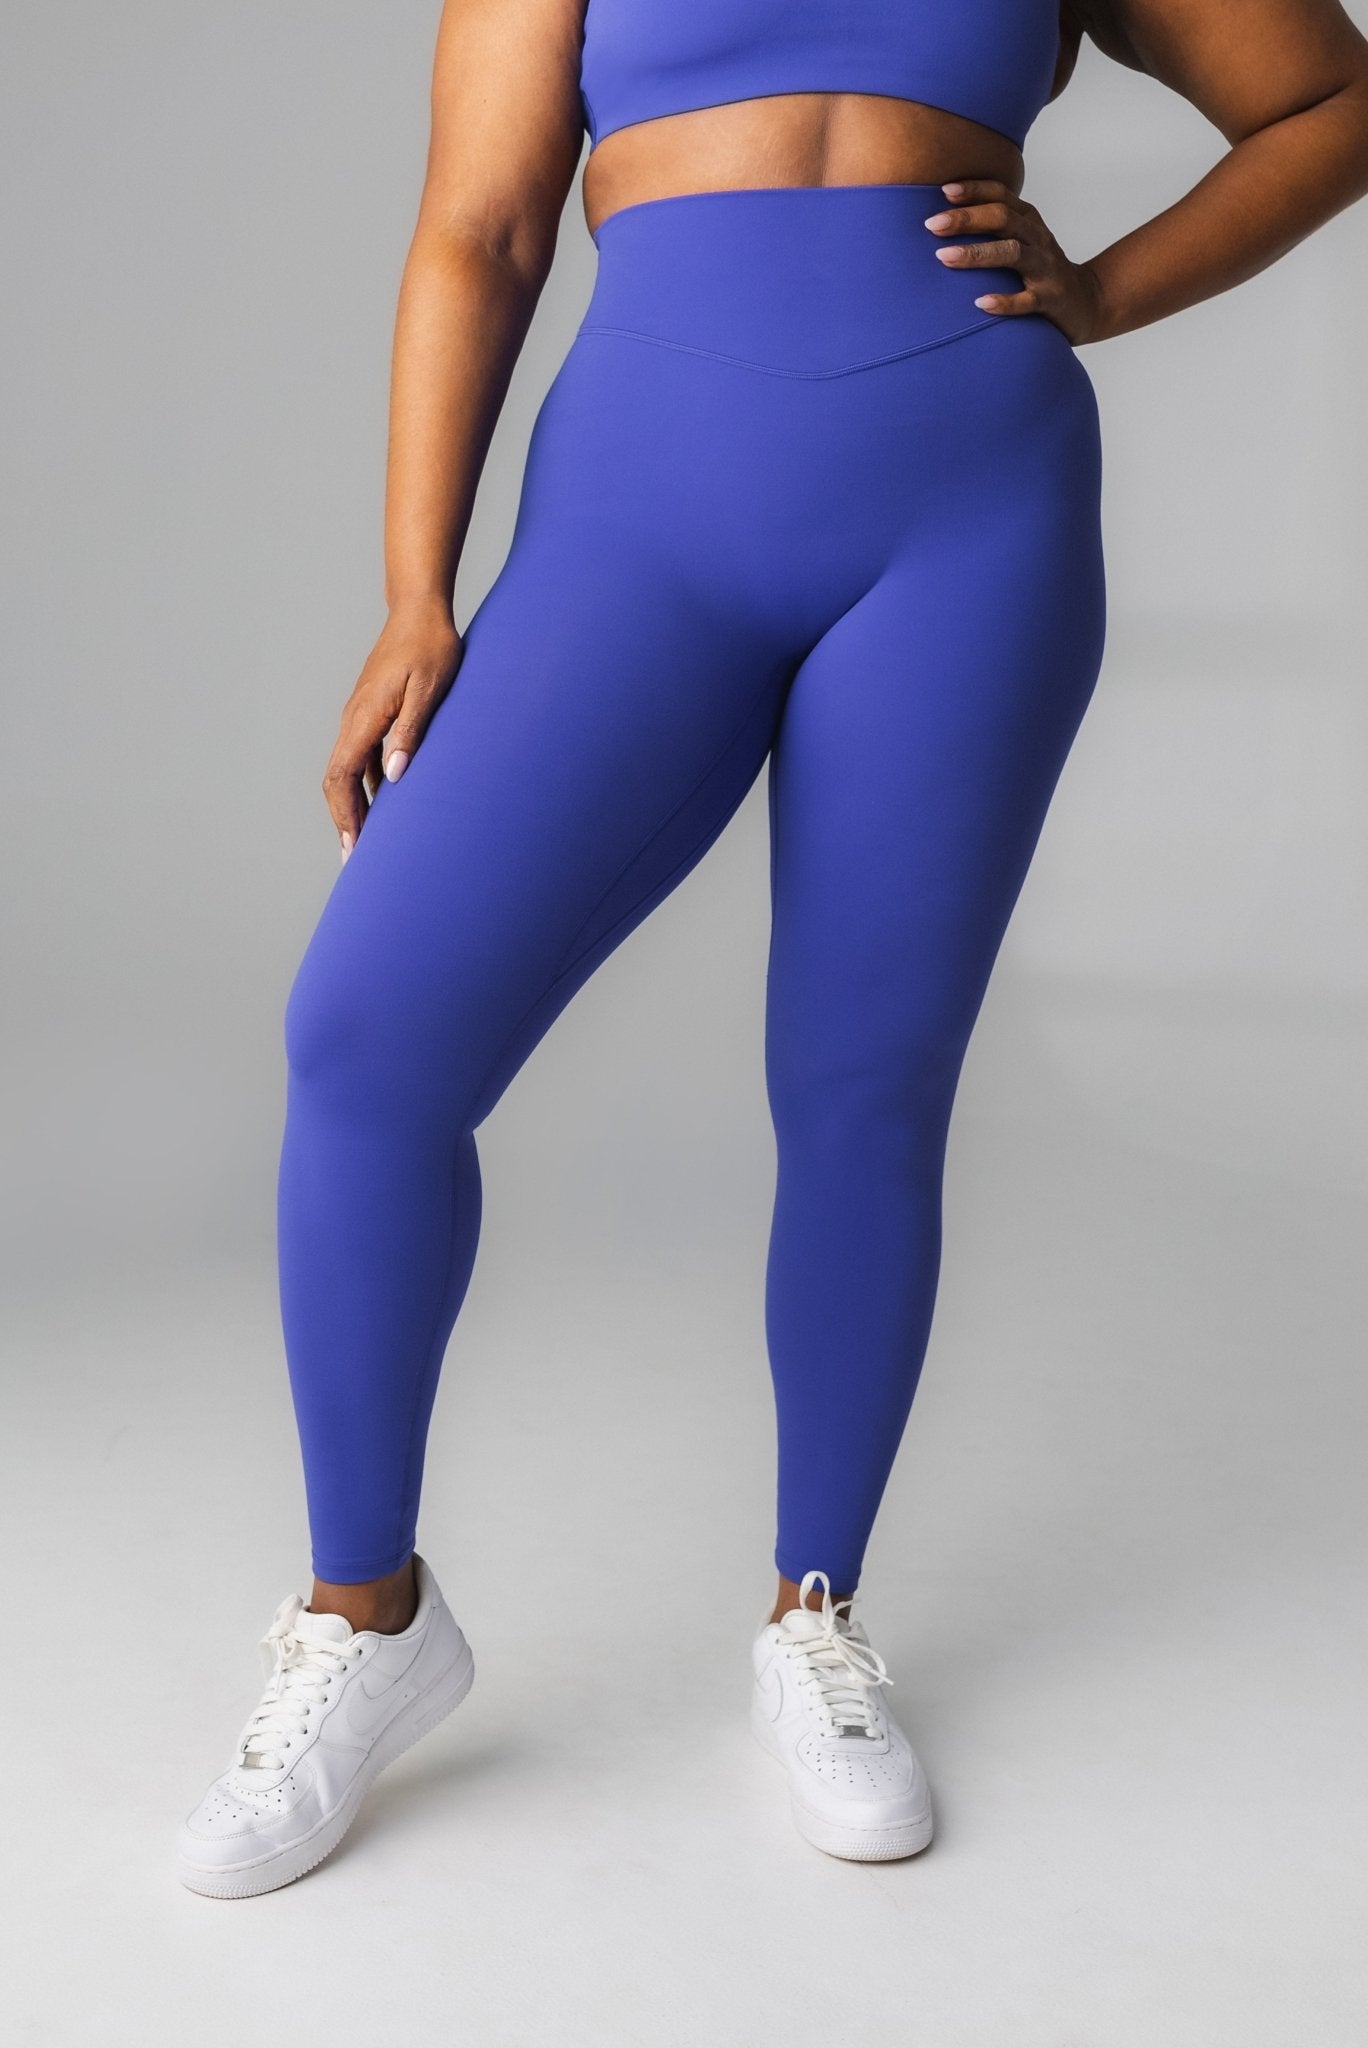 Wholesale royal blue sexy girls wearing skin tight yoga pants fitness From  m.alibaba.com